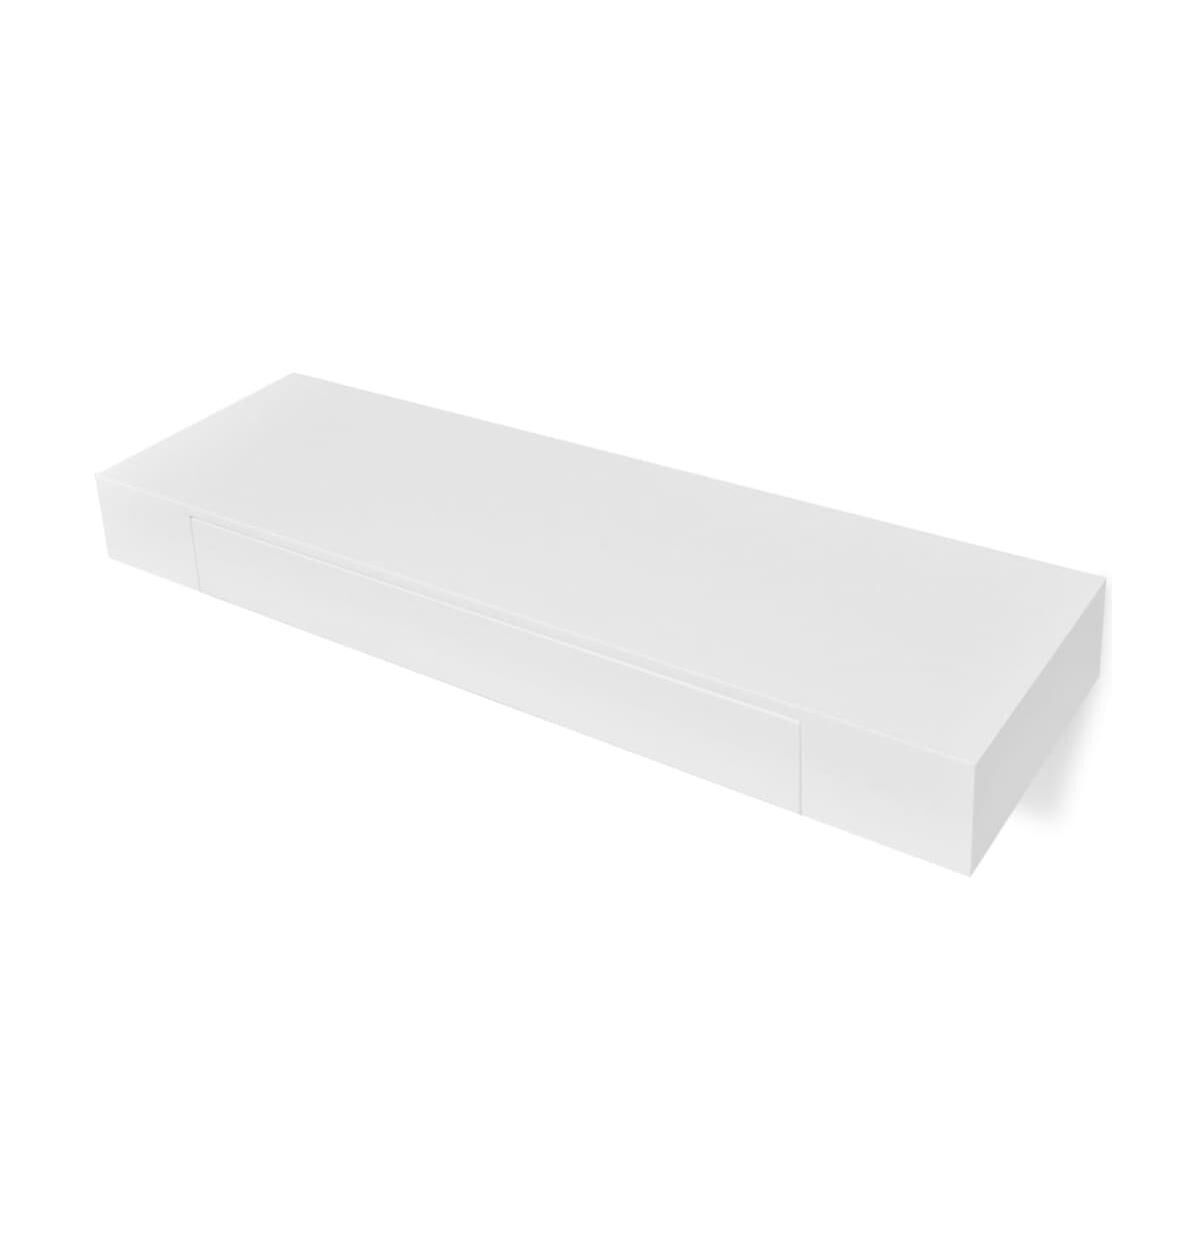 Vidaxl Floating Wall Shelves with Drawers 2 pcs White 31.5